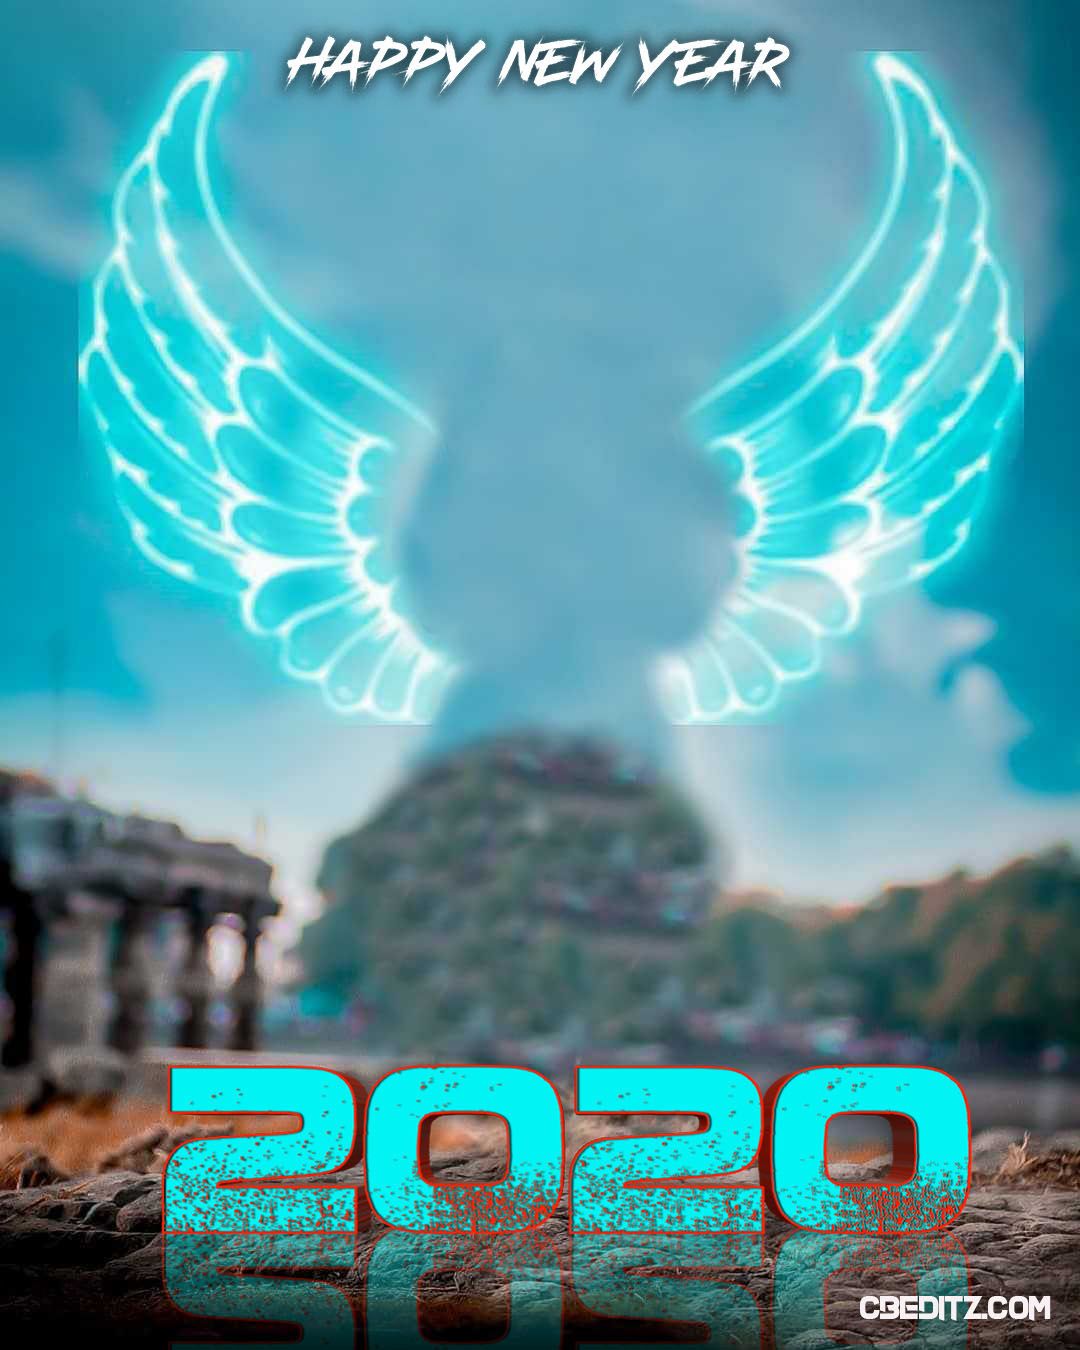 Top New Year 2020 Editing Background 2020 in 2020 New